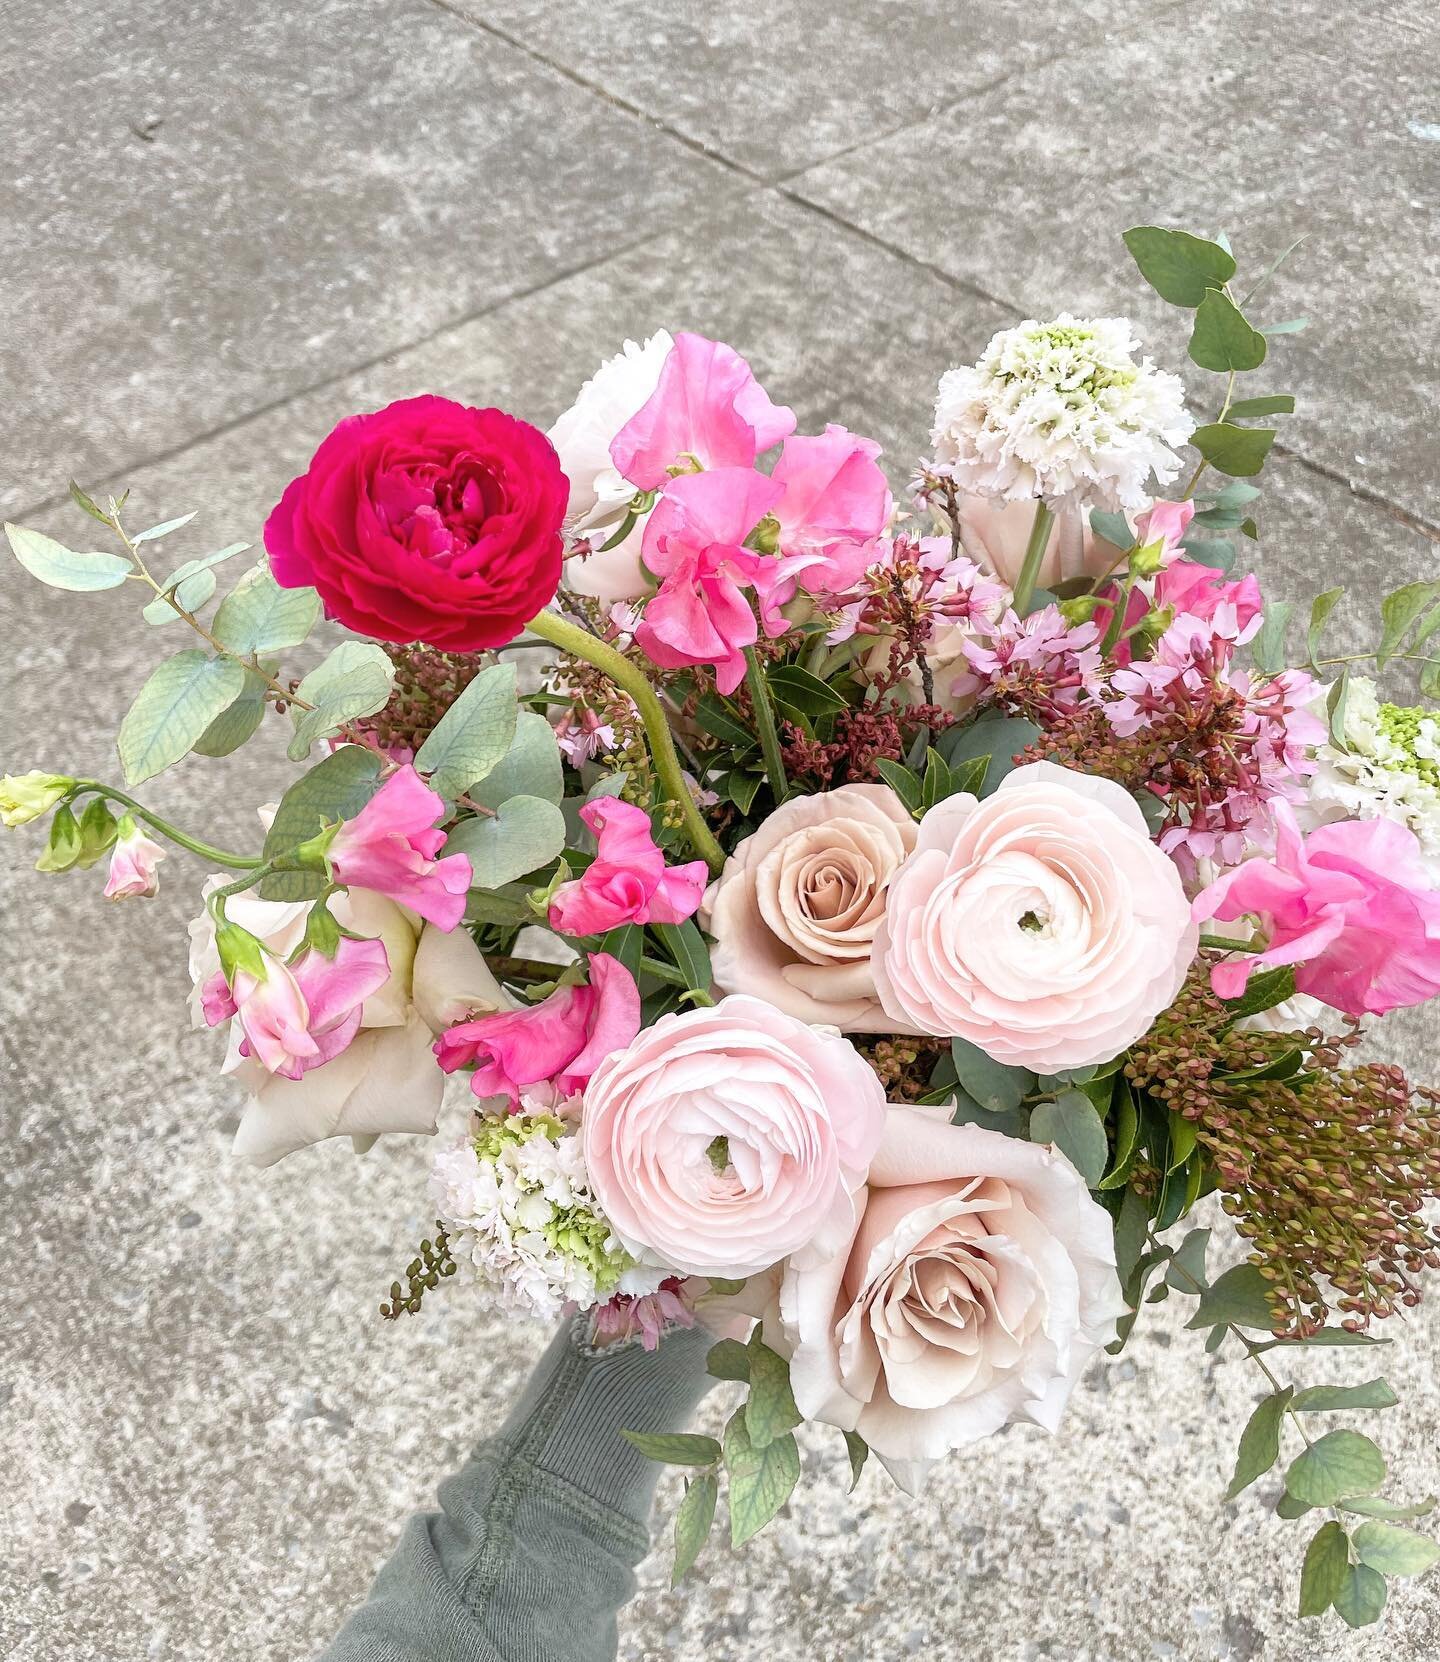 Hi friends! Flowers are a perishable product, and while they are absolutely beautiful, they are very delicate at the same time. Here are a few tips to keep your flower arrangements looking fresh for as long as possible: 

1. Check water level in the 